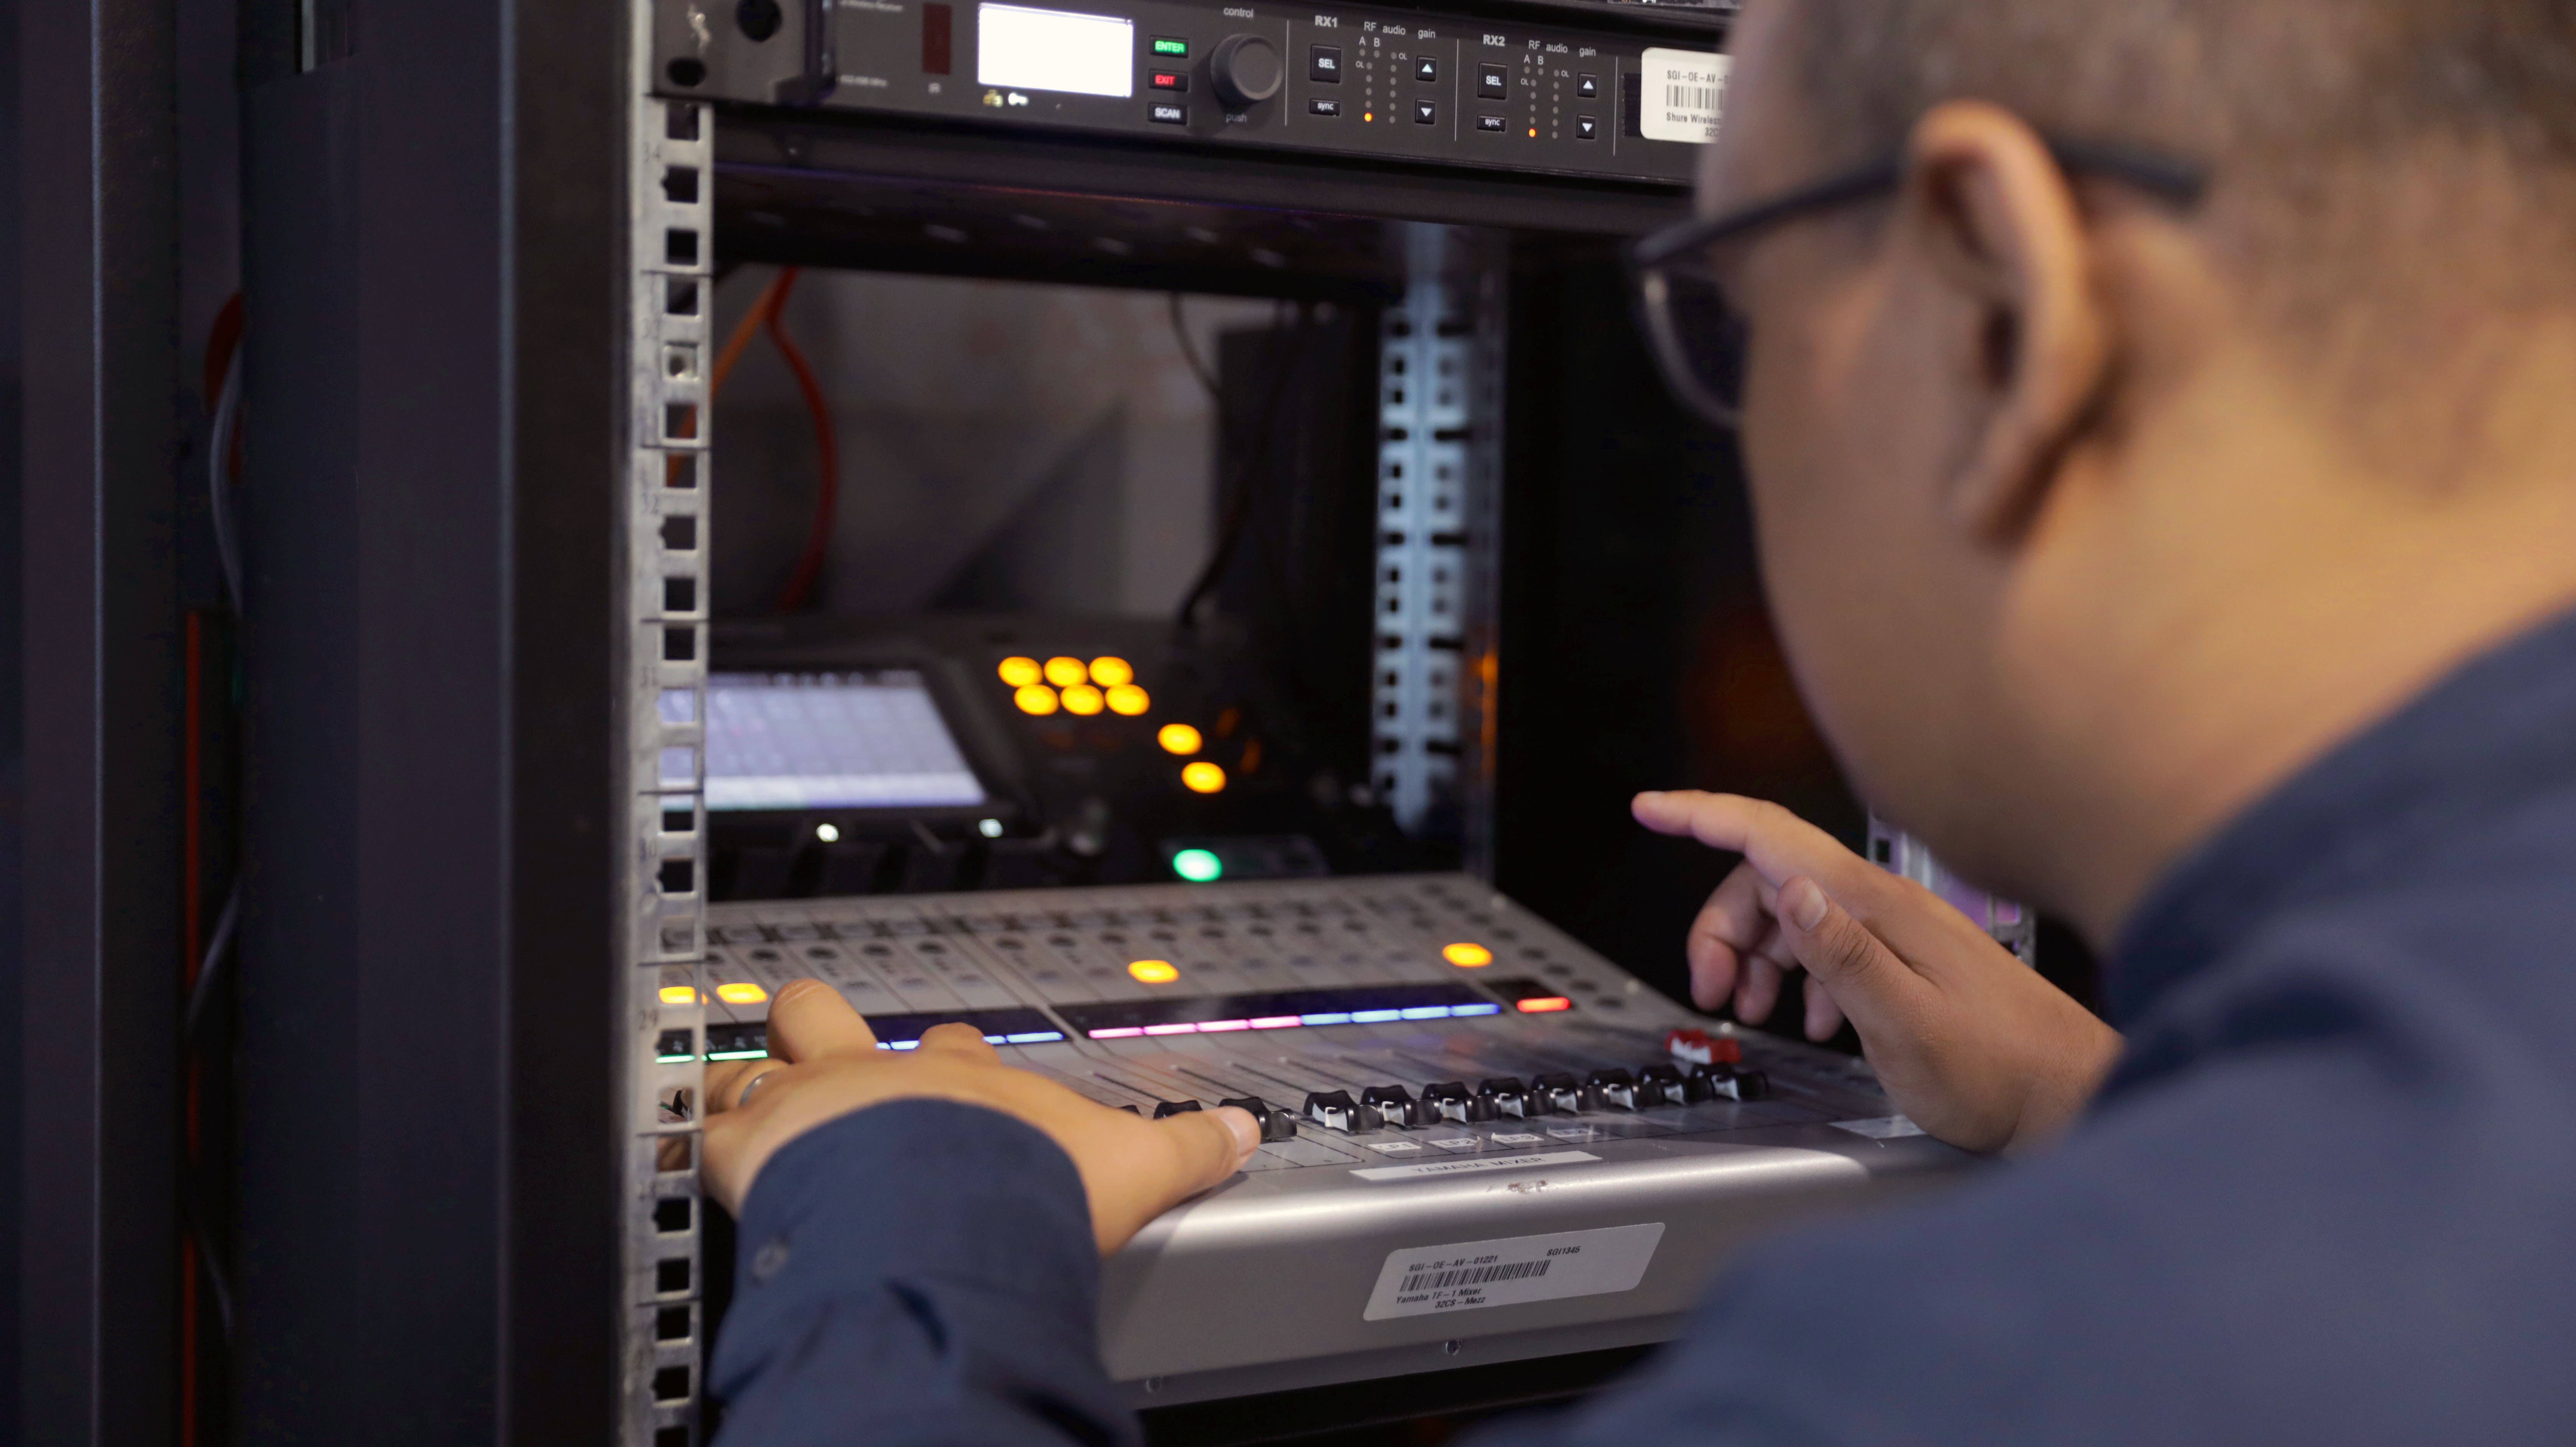 Keeping our AV systems running smoothly, Zul's expertise ensures flawless audio-visual experiences for our events.